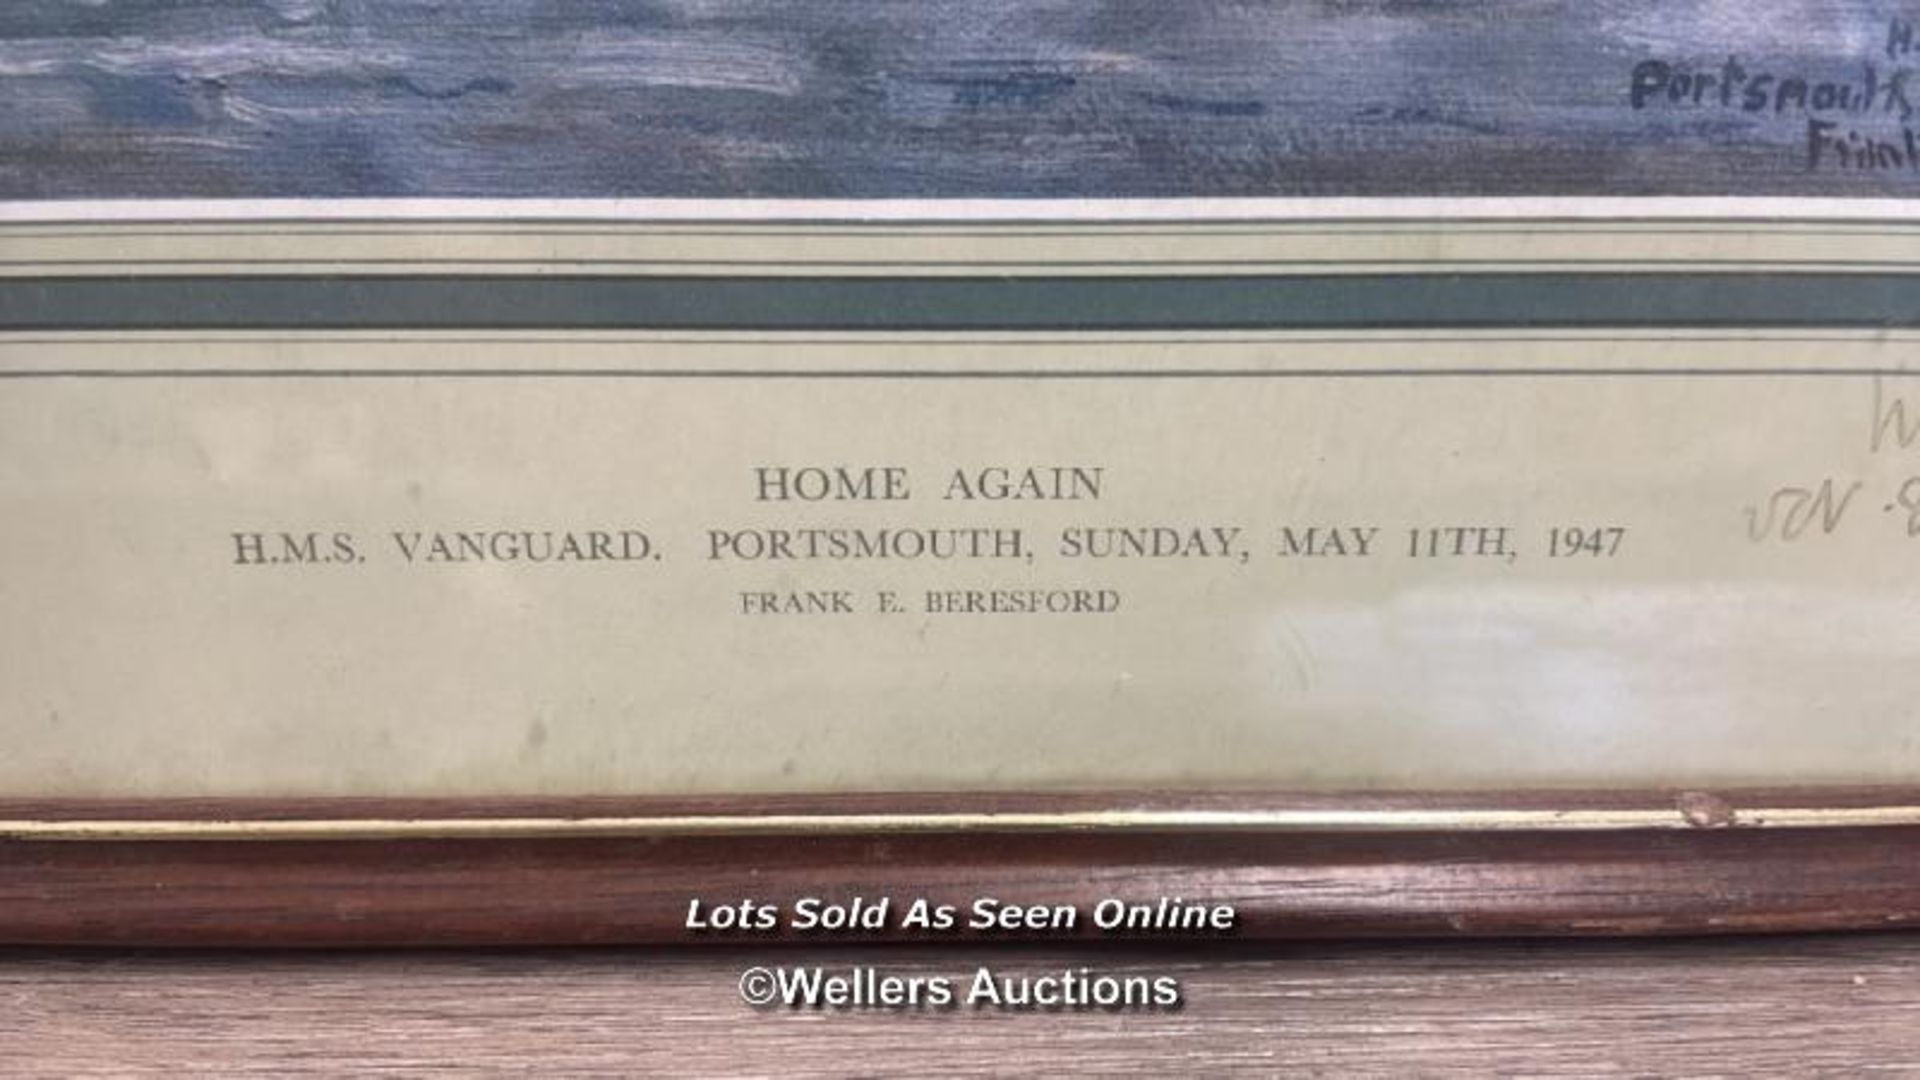 H.M.S. VANGUARD - FRAMED PRINT 'HOME AGAIN' WITH HAND WRITTEN DEDICATION DATED 1947 43.5 X 31.5CM - Image 5 of 6